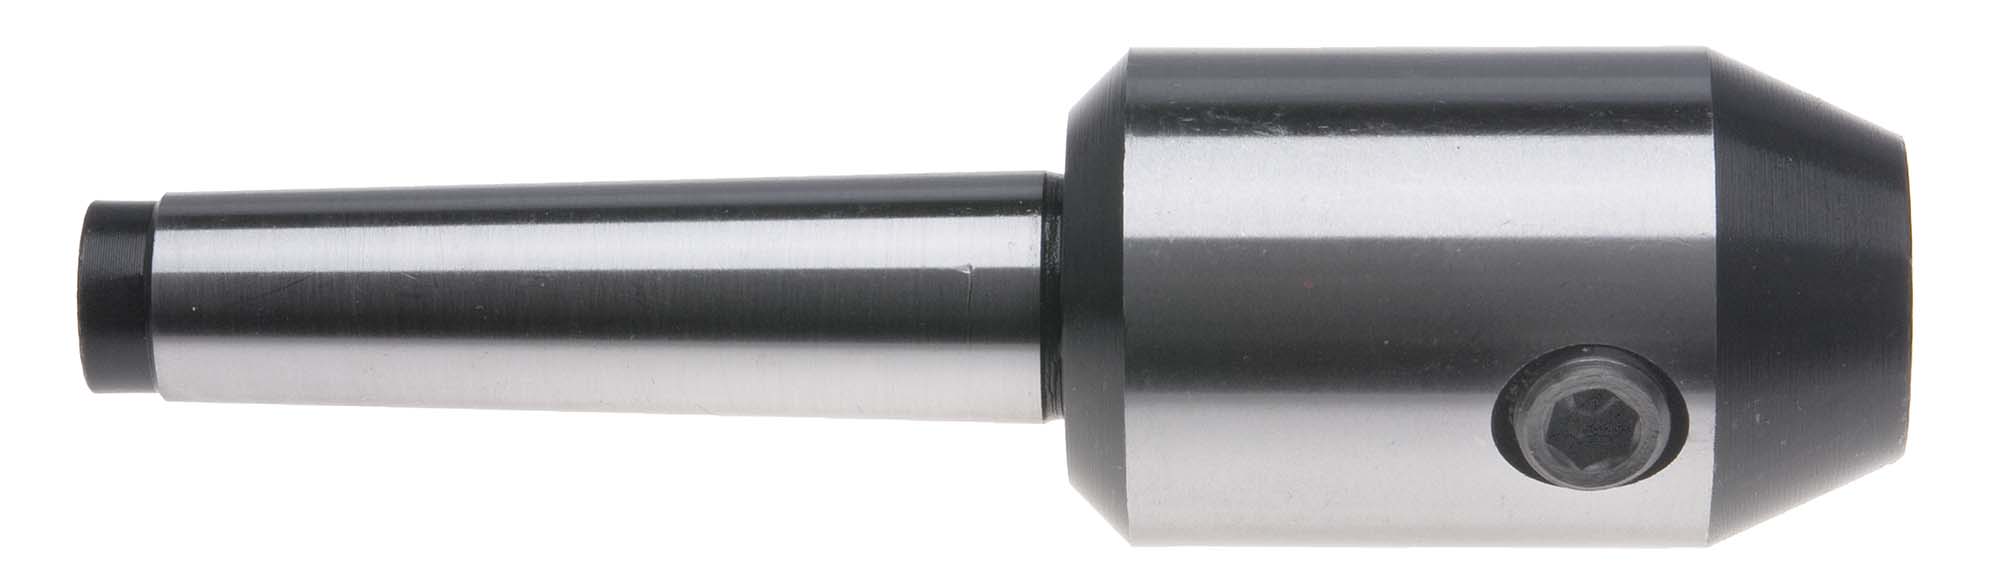 4 MT-1"  End Mill Adapter with Drawbar End